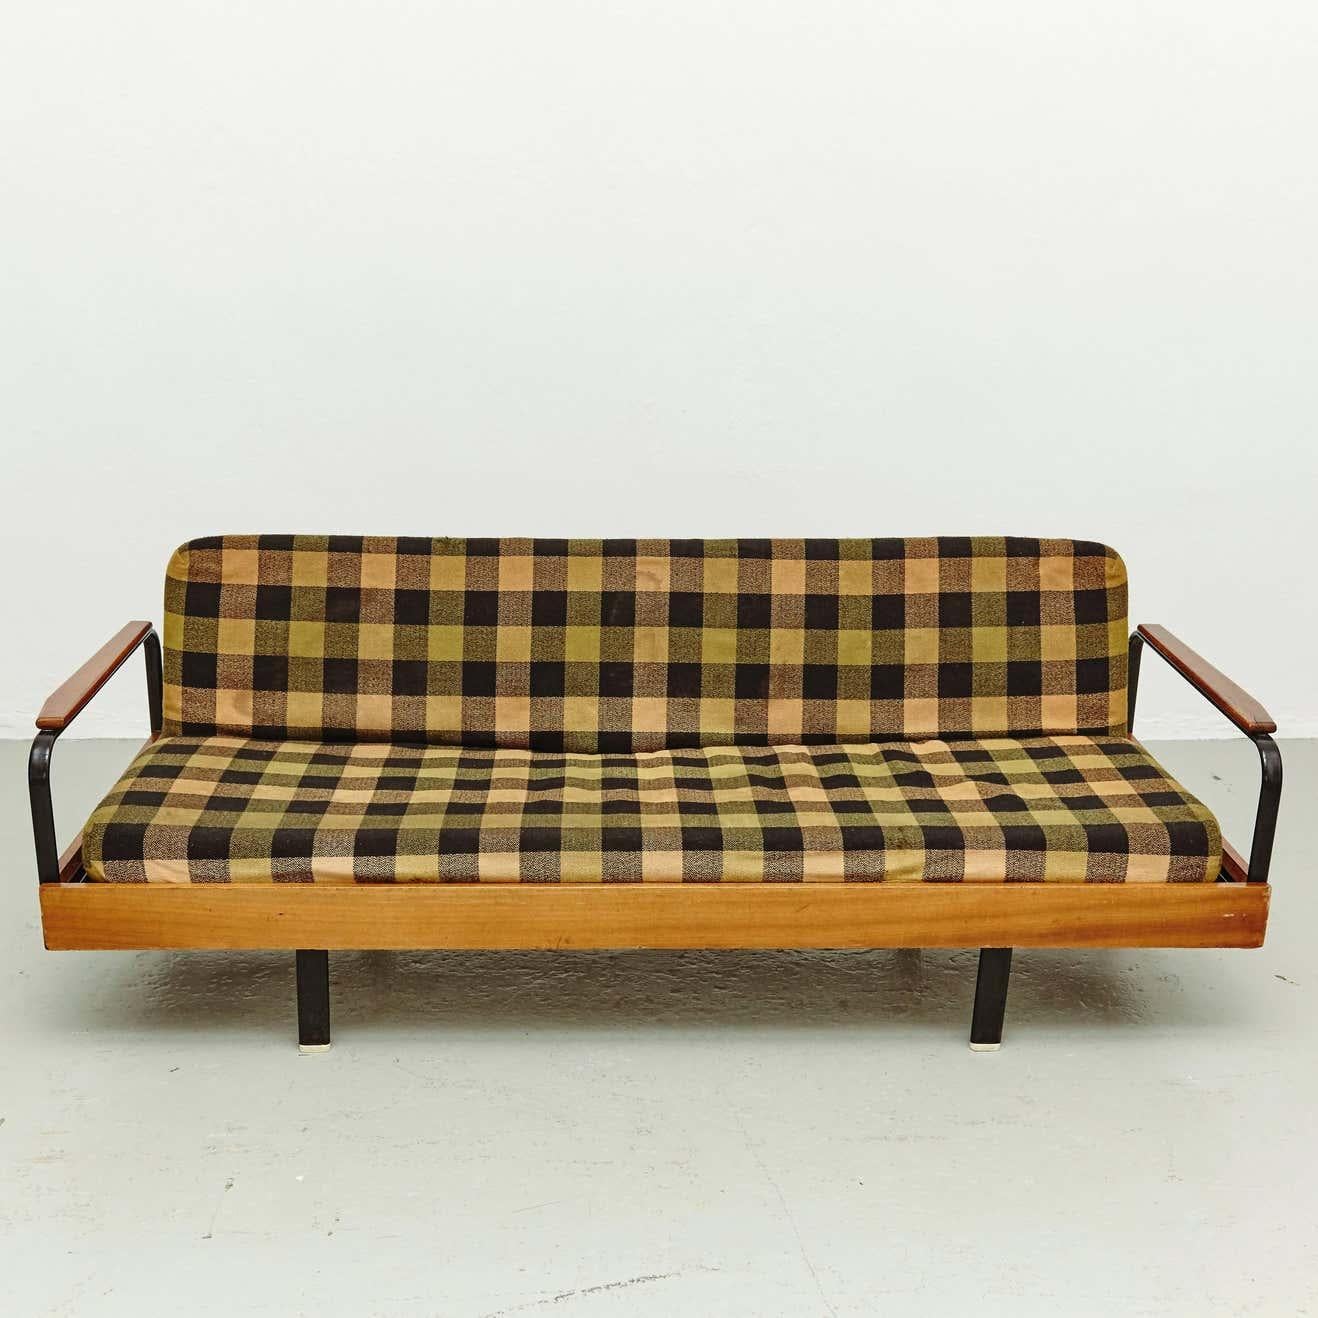 Sofa by unknown manufacturer in France, circa 1950, designed in the manner of Jean Prouve. 

Lacquered metal base and wood. 

The cushion are original.

In good original condition, with minor wear consistent with age and use, preserving a